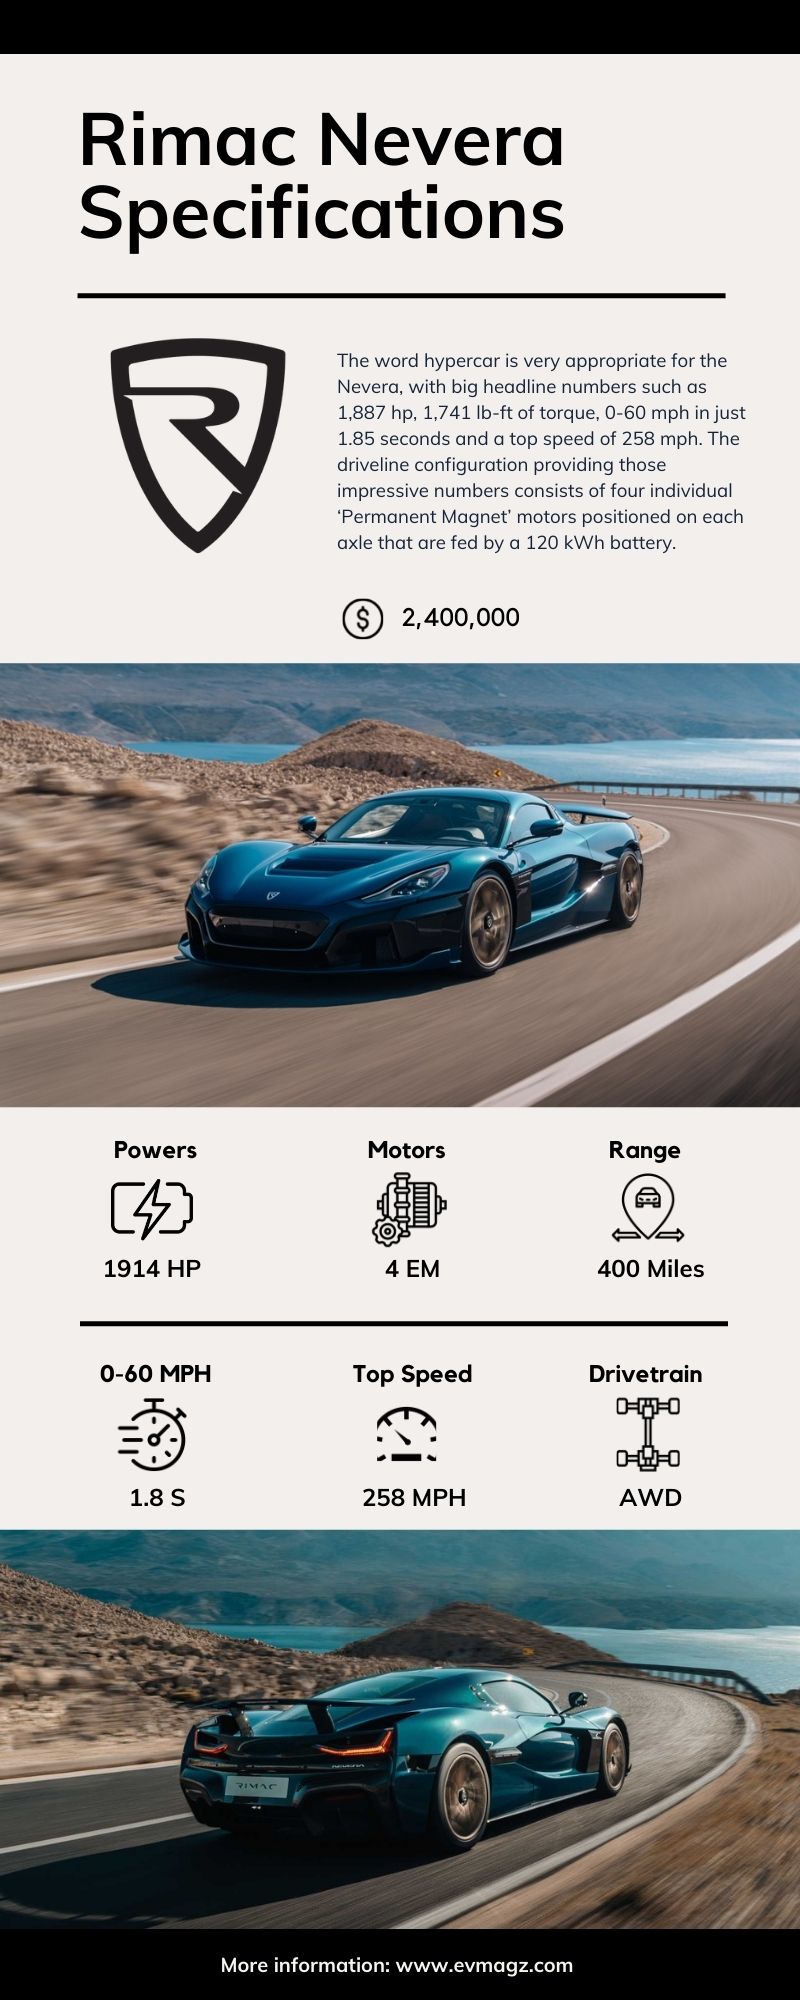 Rimac Nevera Specifications Infographic